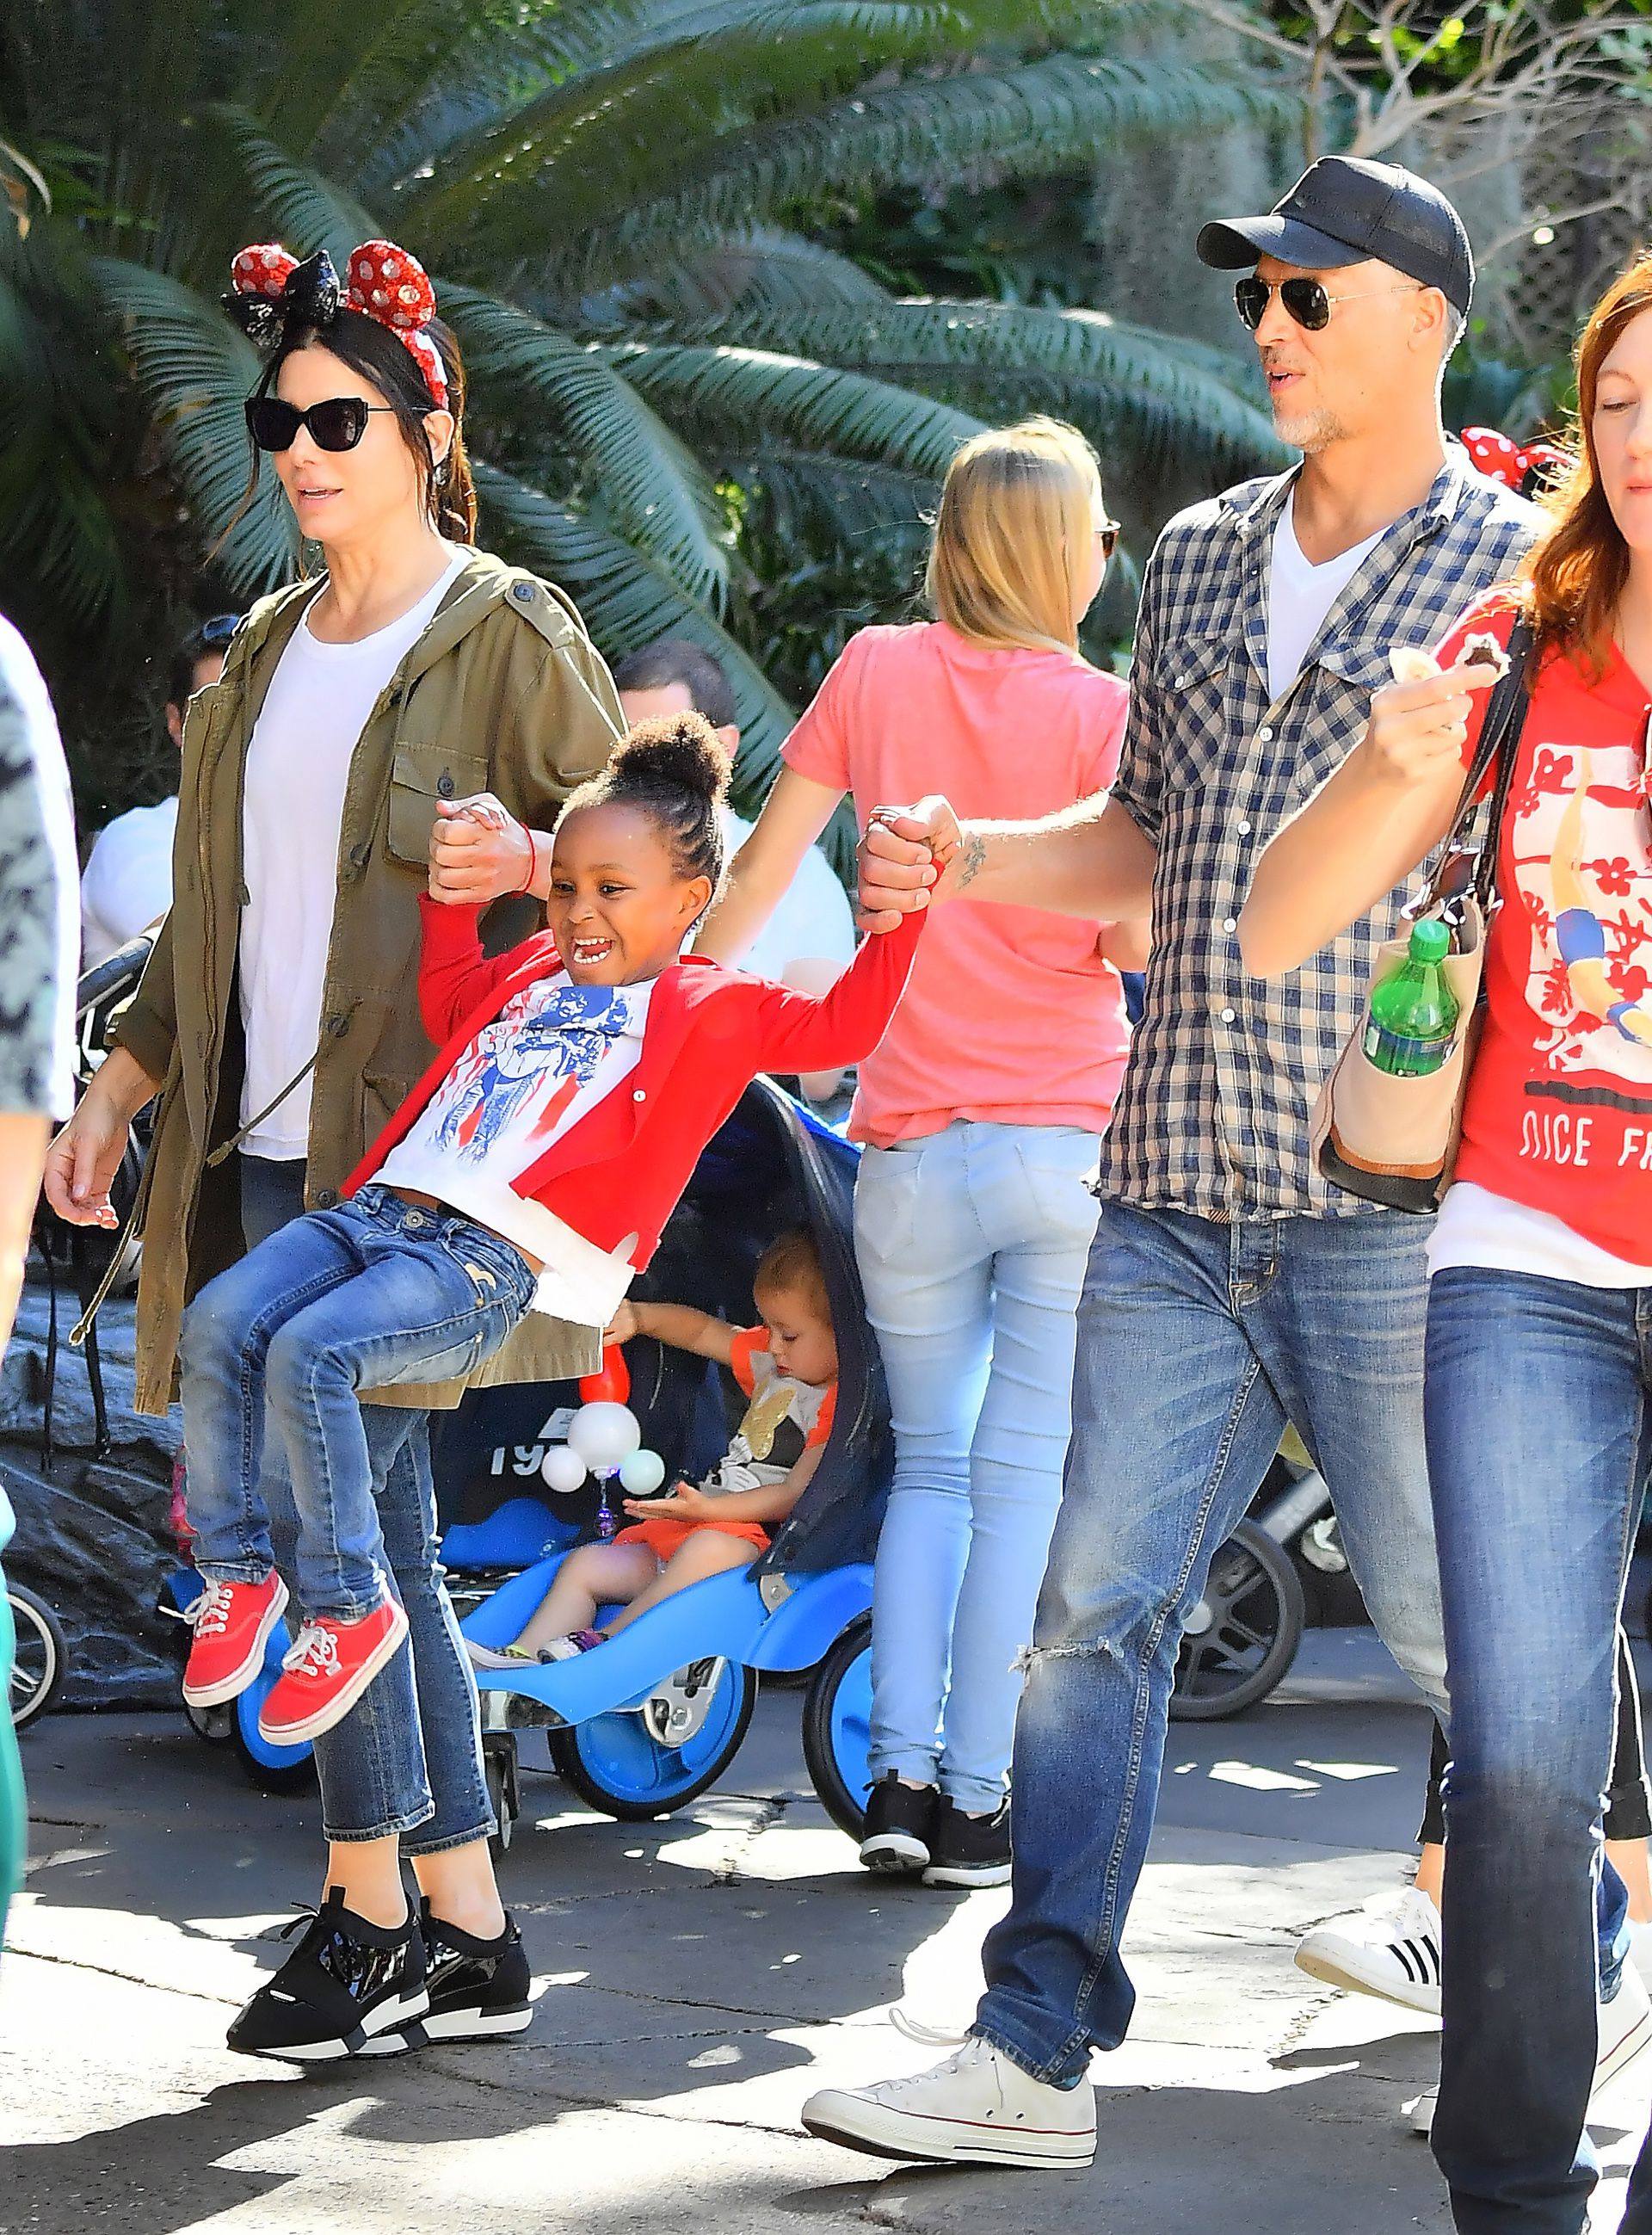 Sandra Bullock and her boyfriend Bryan Randall join Jason Bateman and his family as they spend the day at Disneyland.  Los Angeles, Feb 18, 2018. Photo © 2018 Mega/The Grosby Group